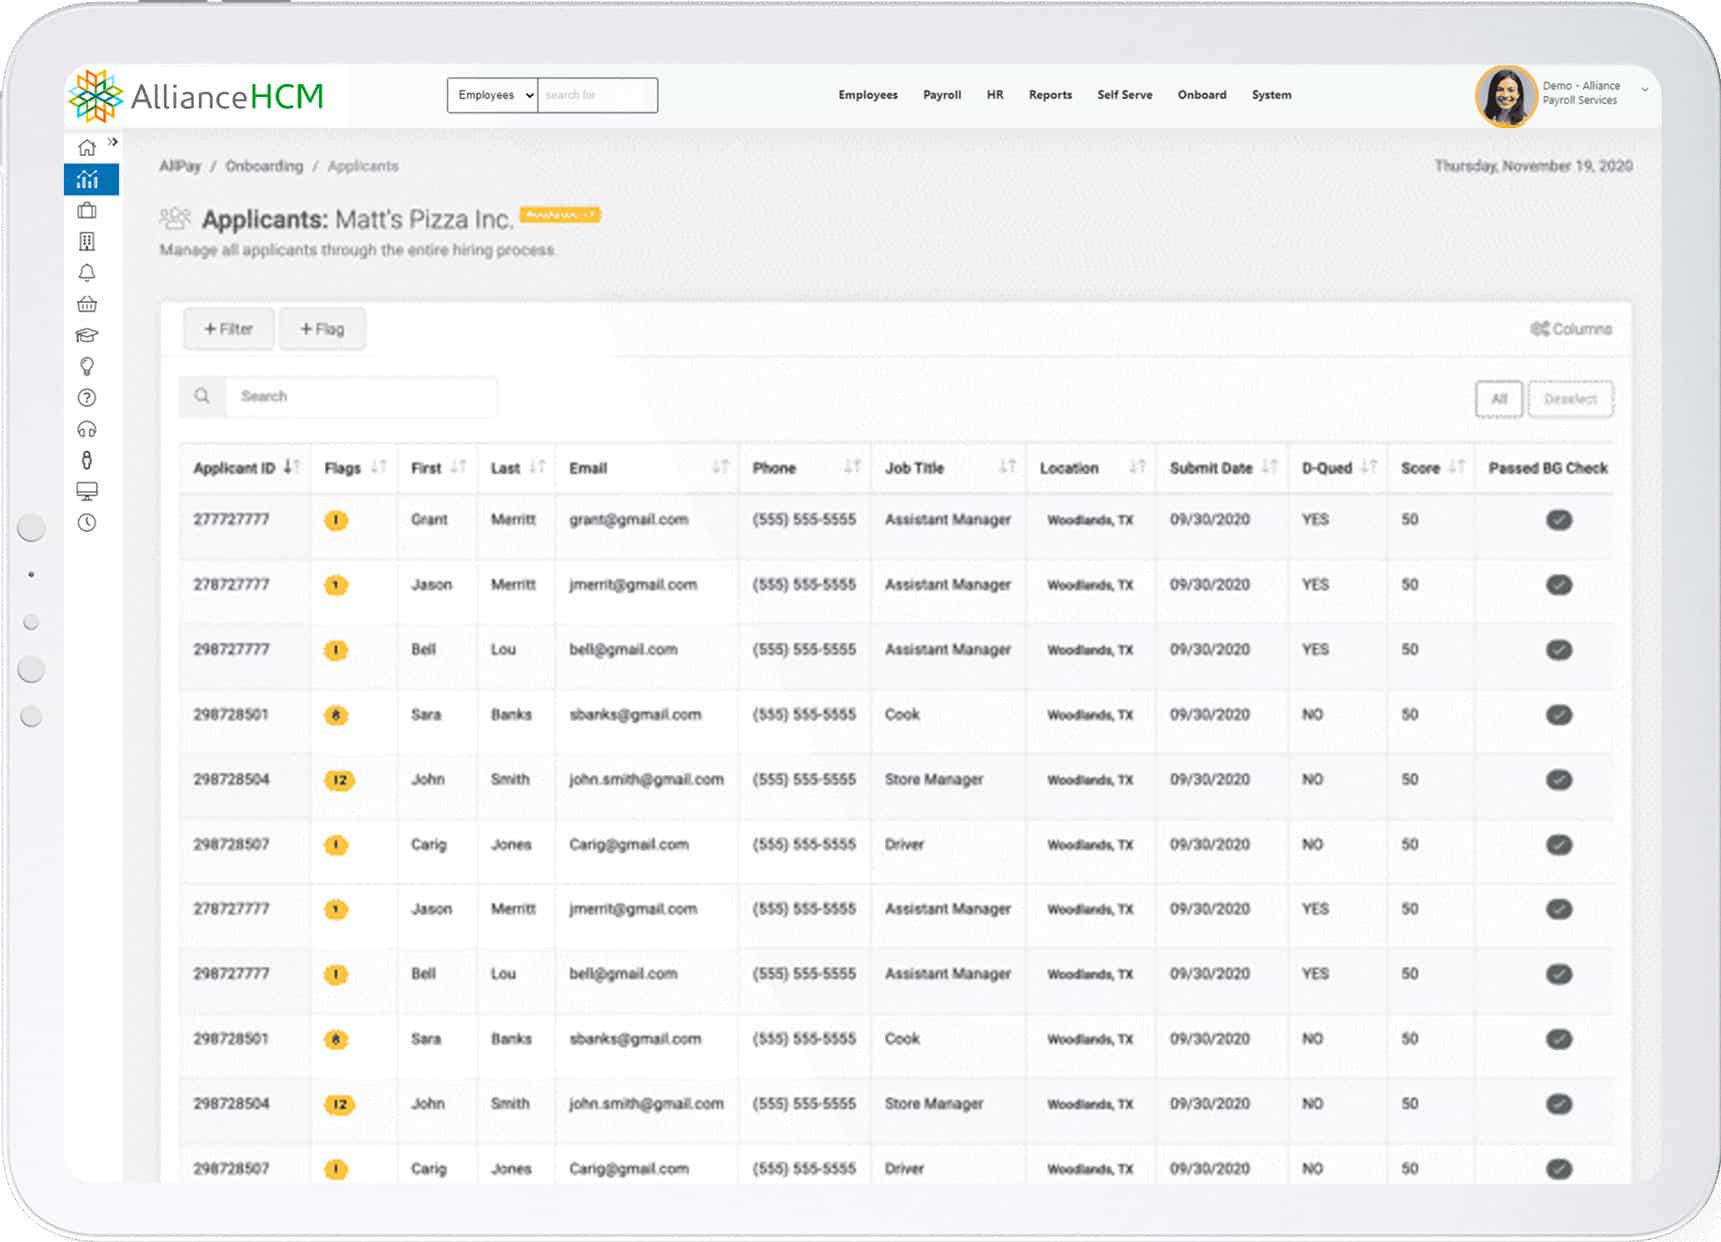 AllianceHCM Applicant Tracking System